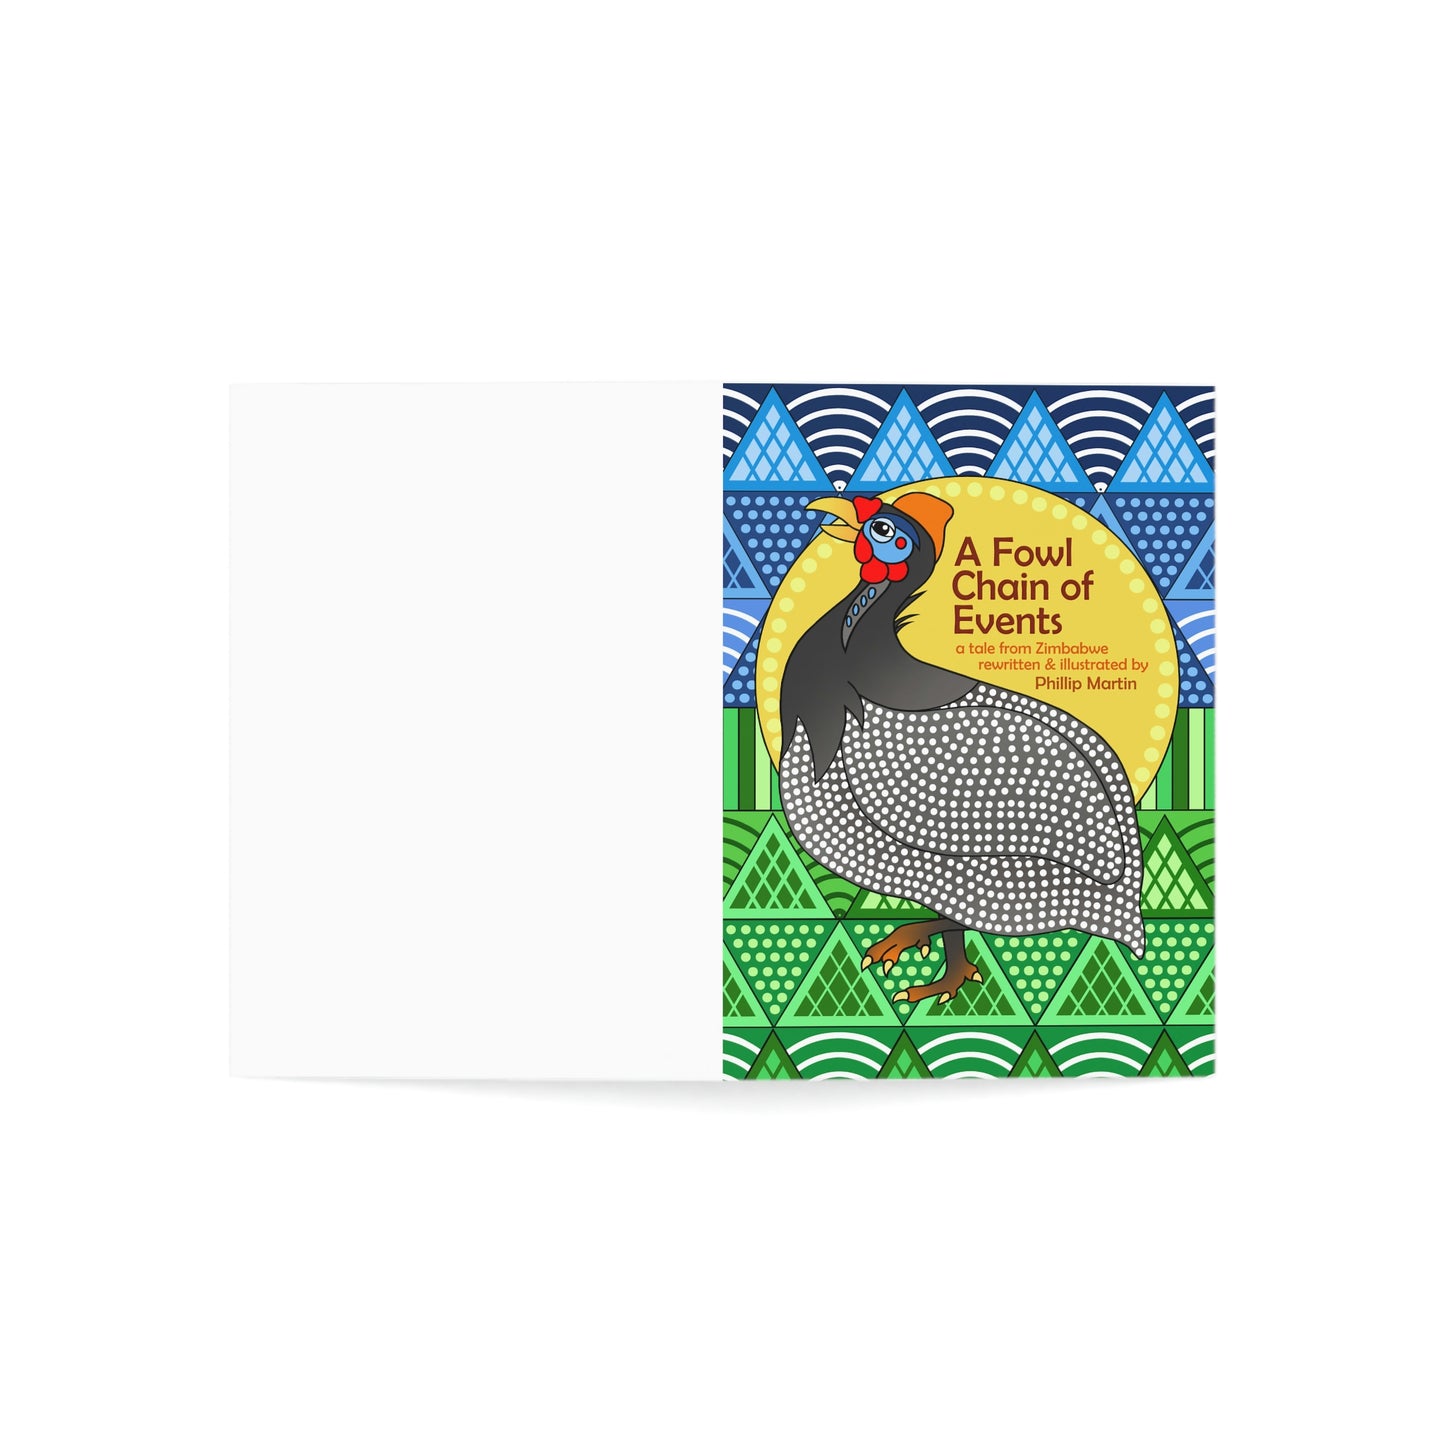 A Fowl Chain of Events Greeting Cards (1, 10, 30, and 50pcs)